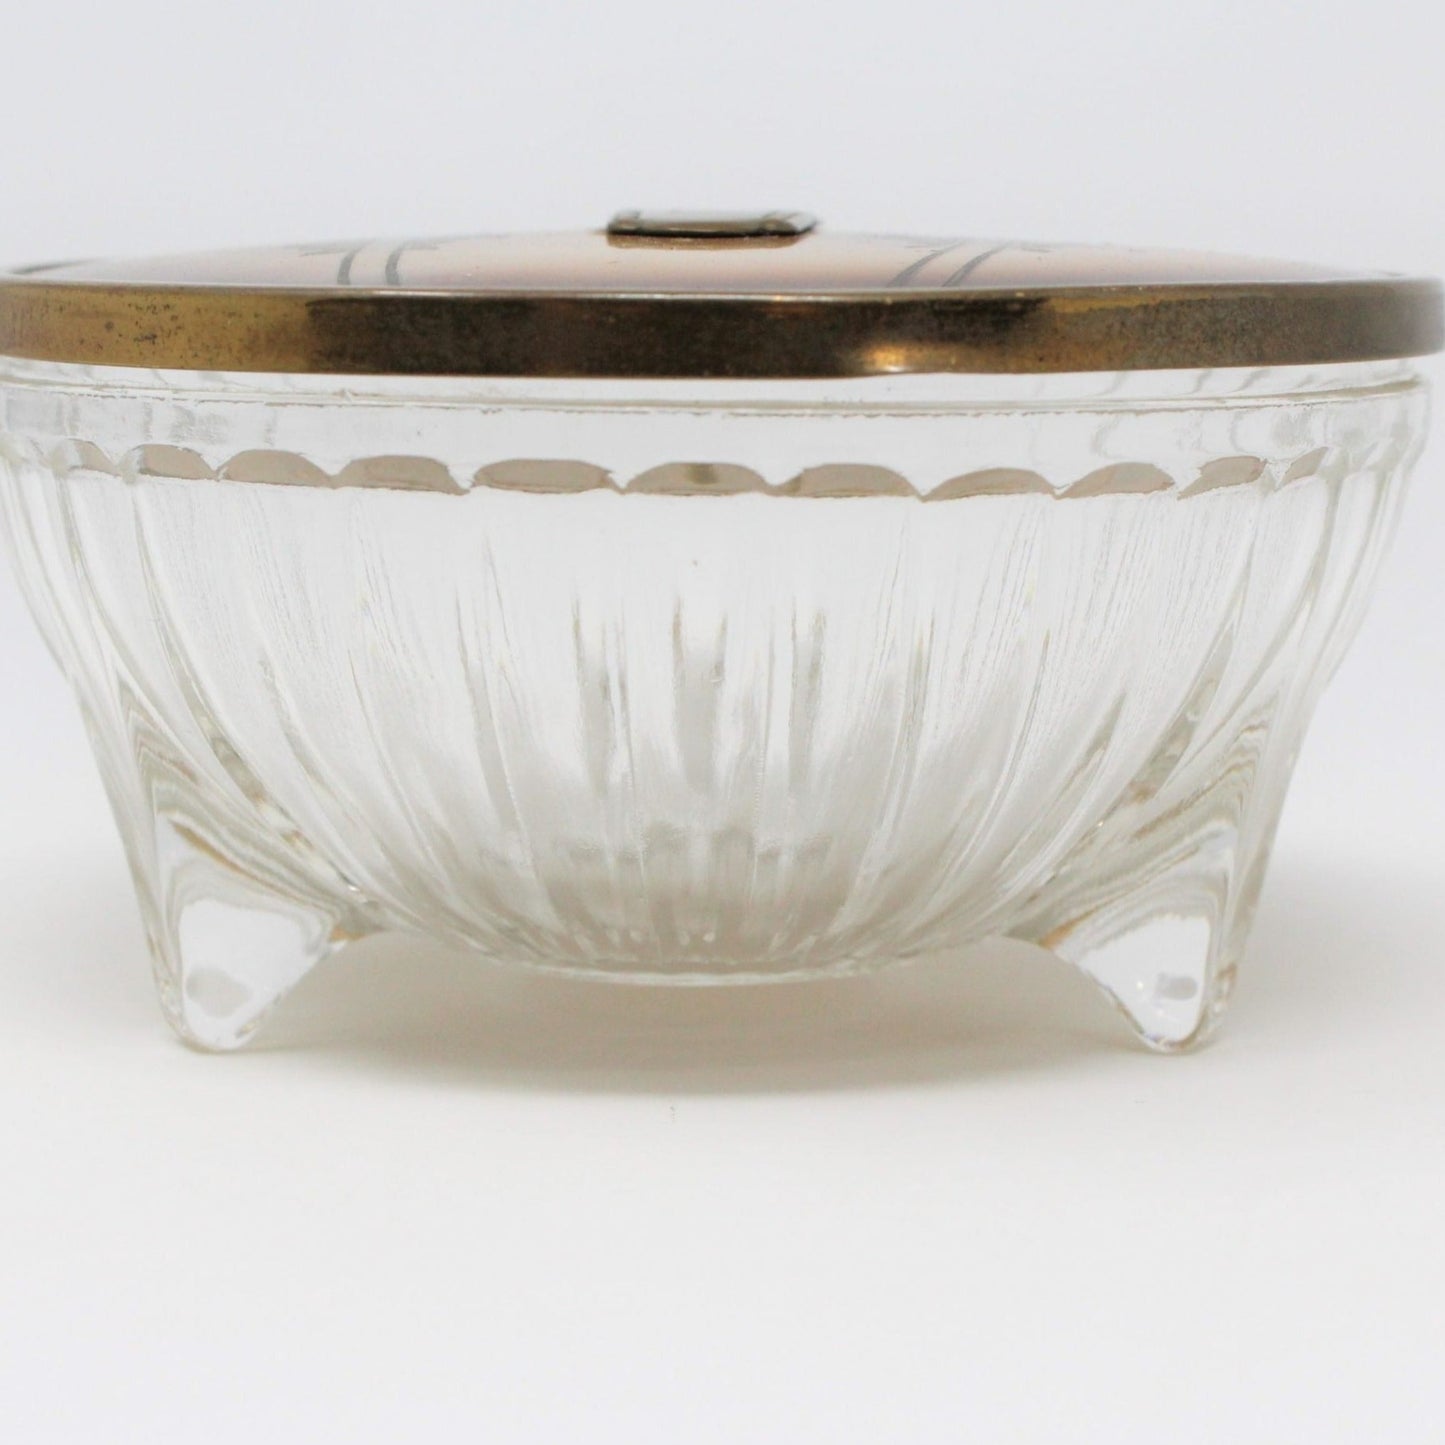 Vanity Jar, Art Deco Glass Footed Jar with Lacquer Lid, Vintage